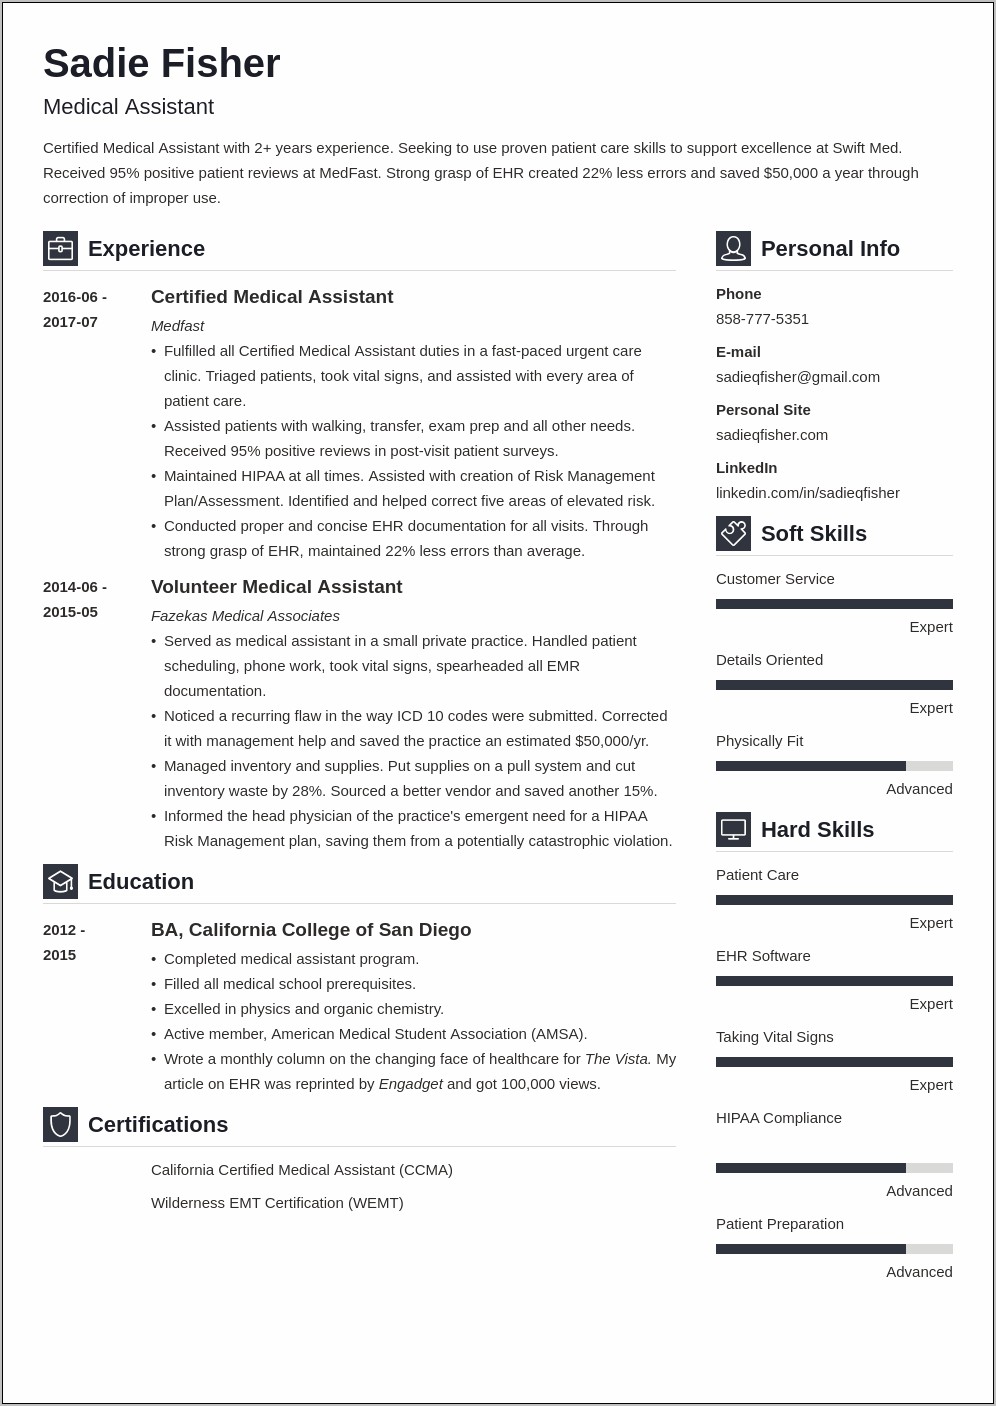 Certified Medical Administrative Assistant Resume Objective Sample